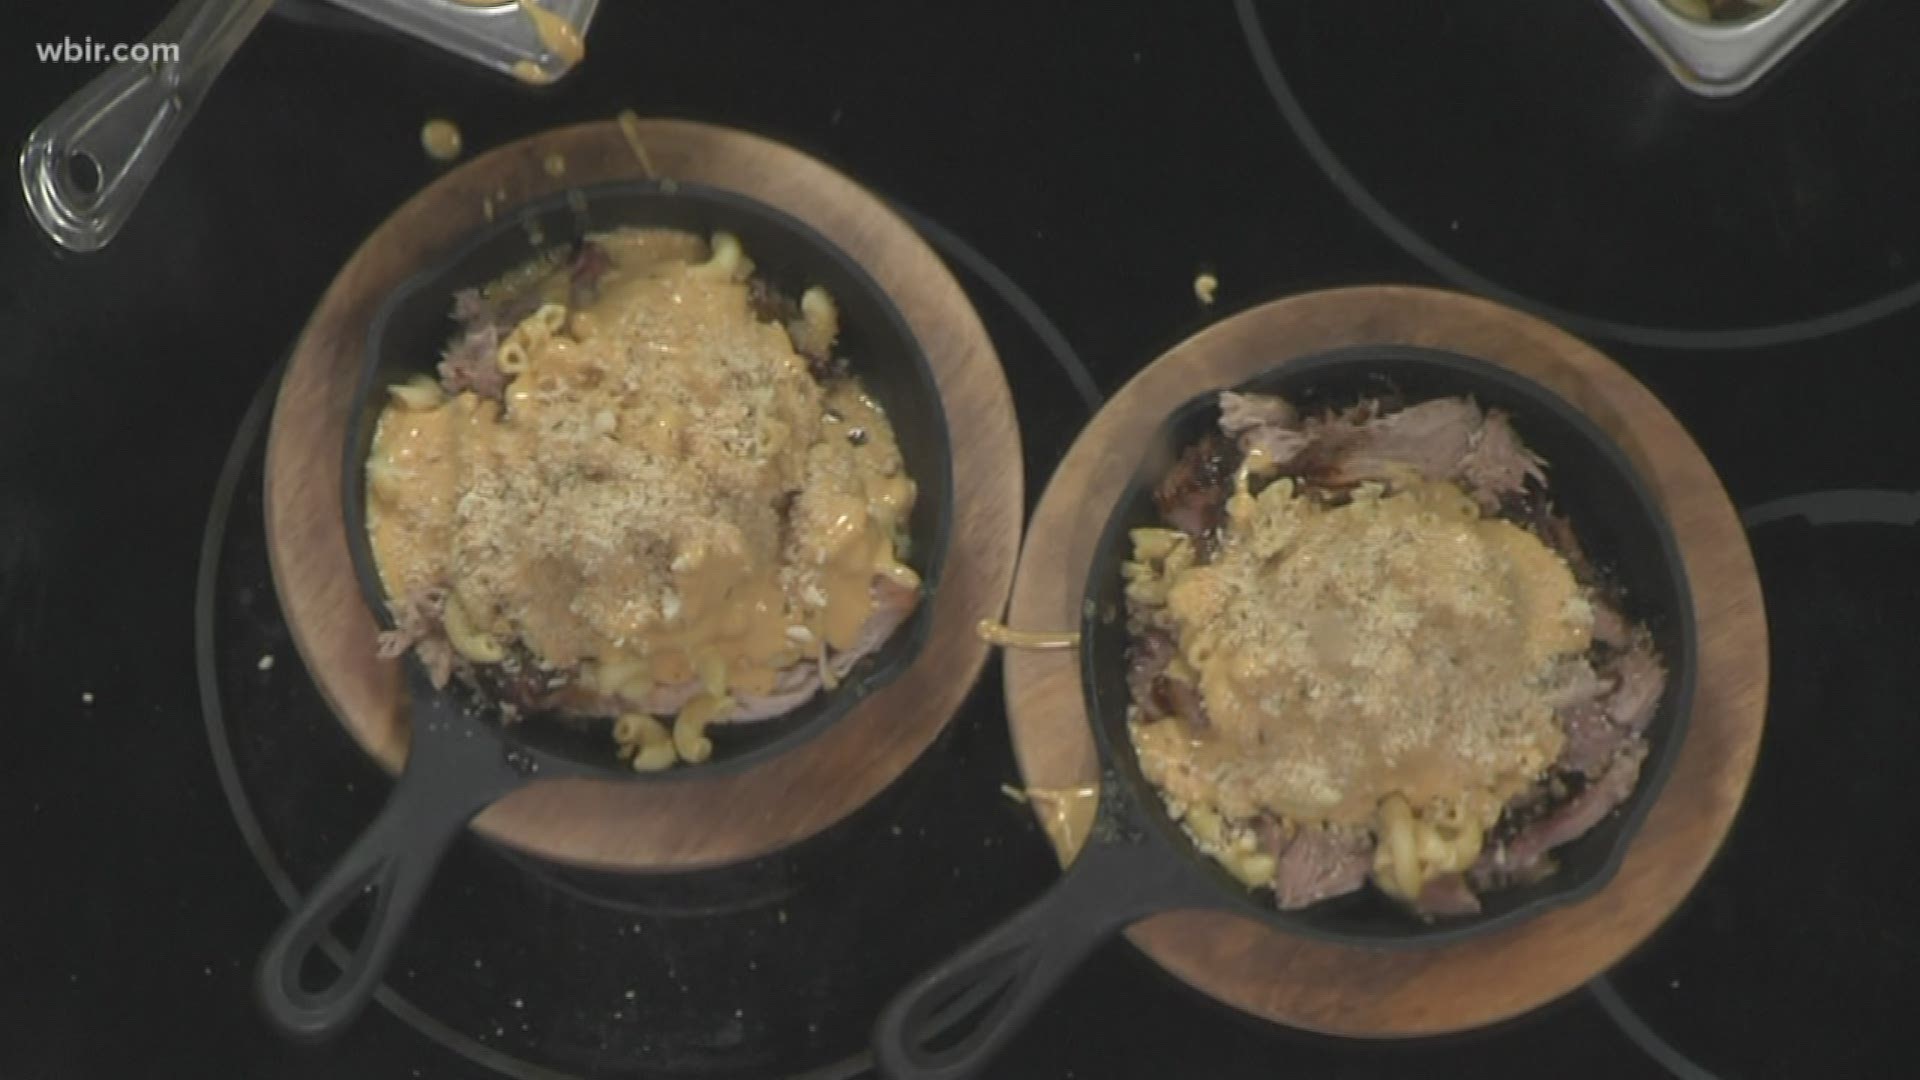 We were in the kitchen with Lee Rice, the culinary director at a new restaurant in Pigeon Forge called Puckett's, and he showed us how to make Piggy Mac.